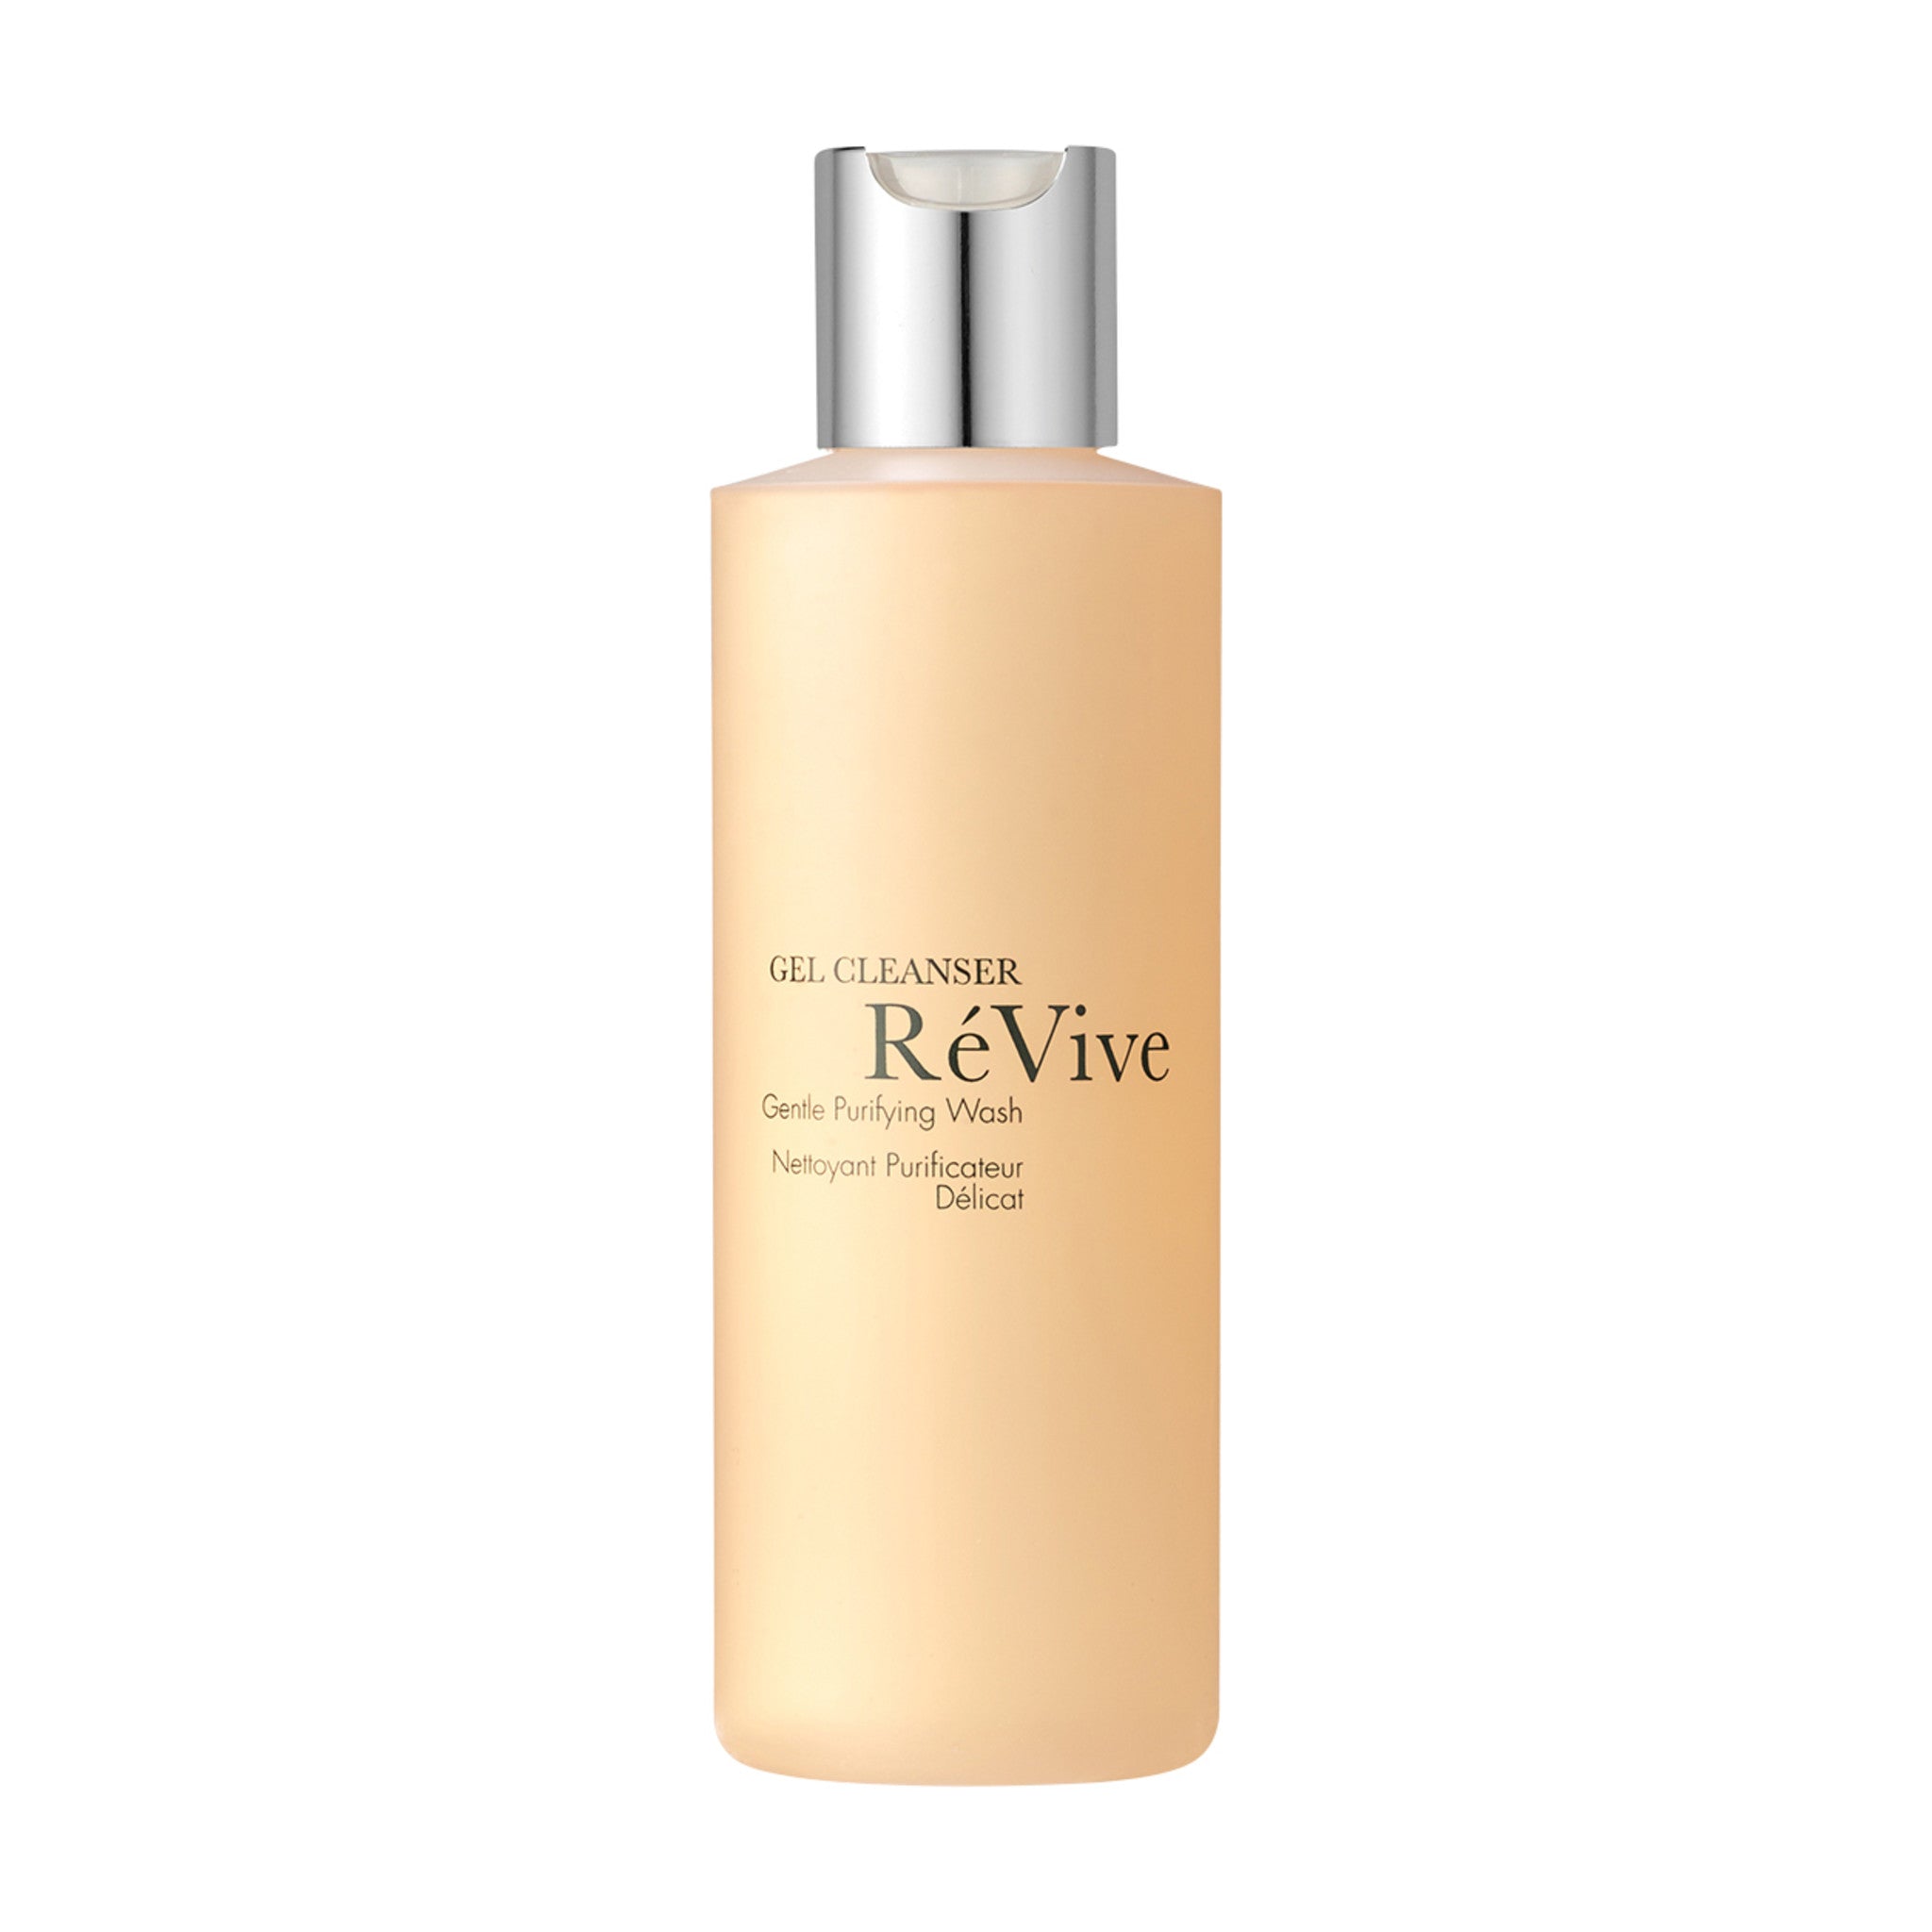 RéVive Gel Cleanser Gentle Purifying Wash main image.